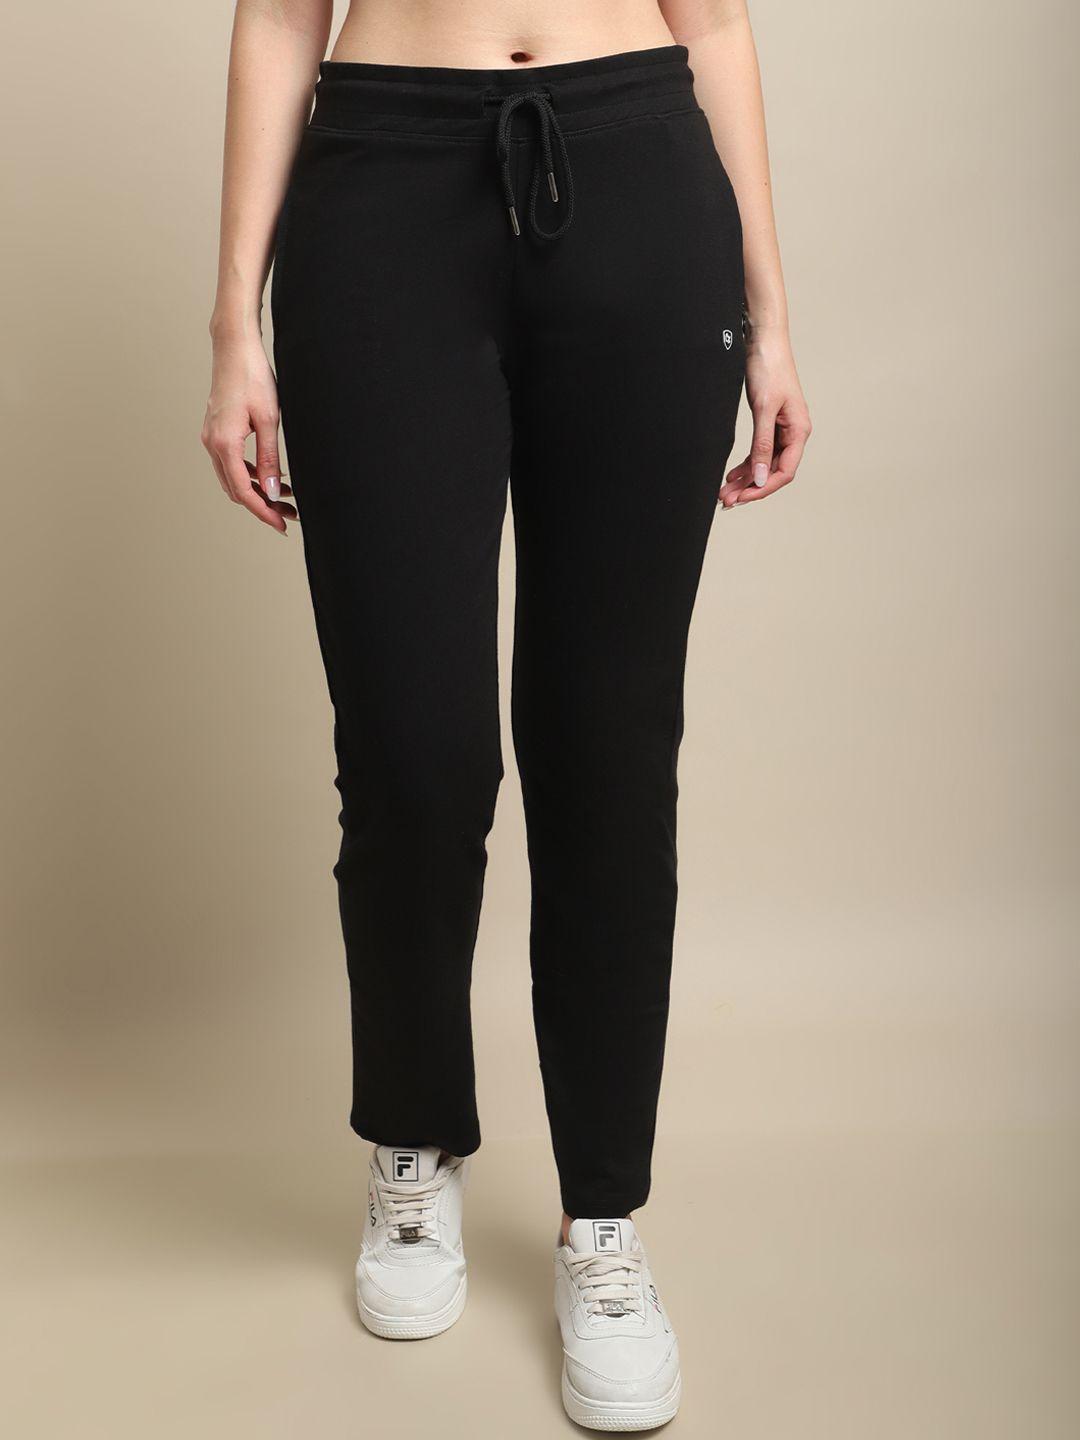 Cantabil Women Mid-Rise Cotton Track Pants